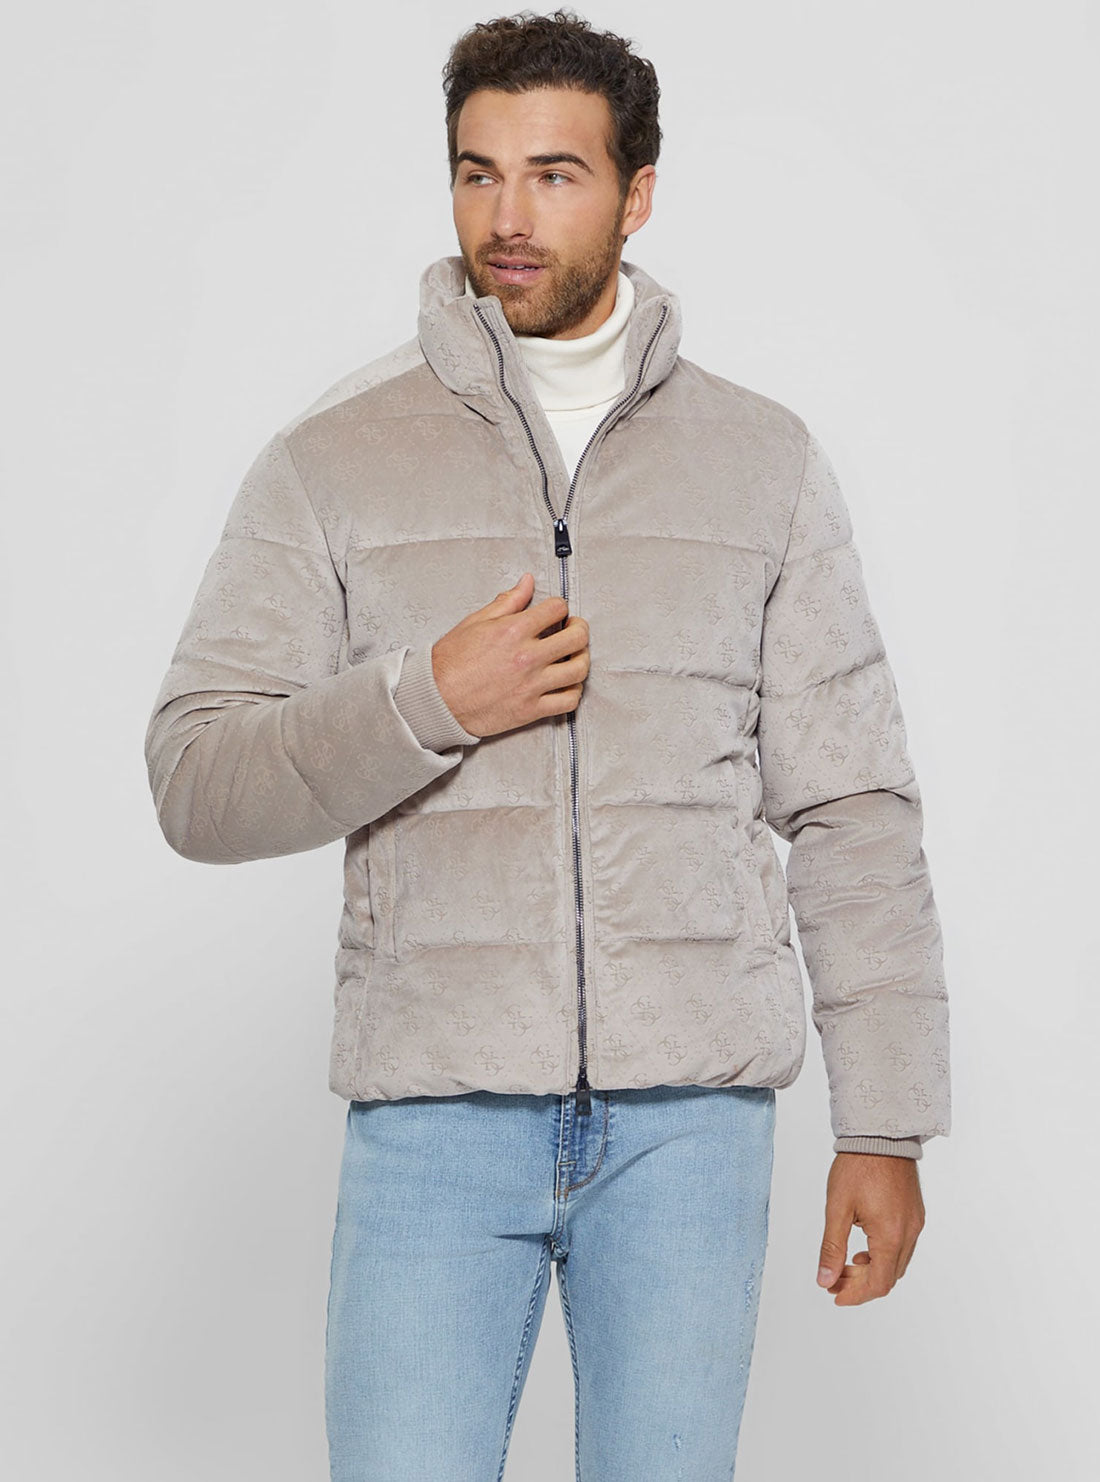 Soft Grey Logo Puffer Jacket | GUESS Men's Apparel | front view